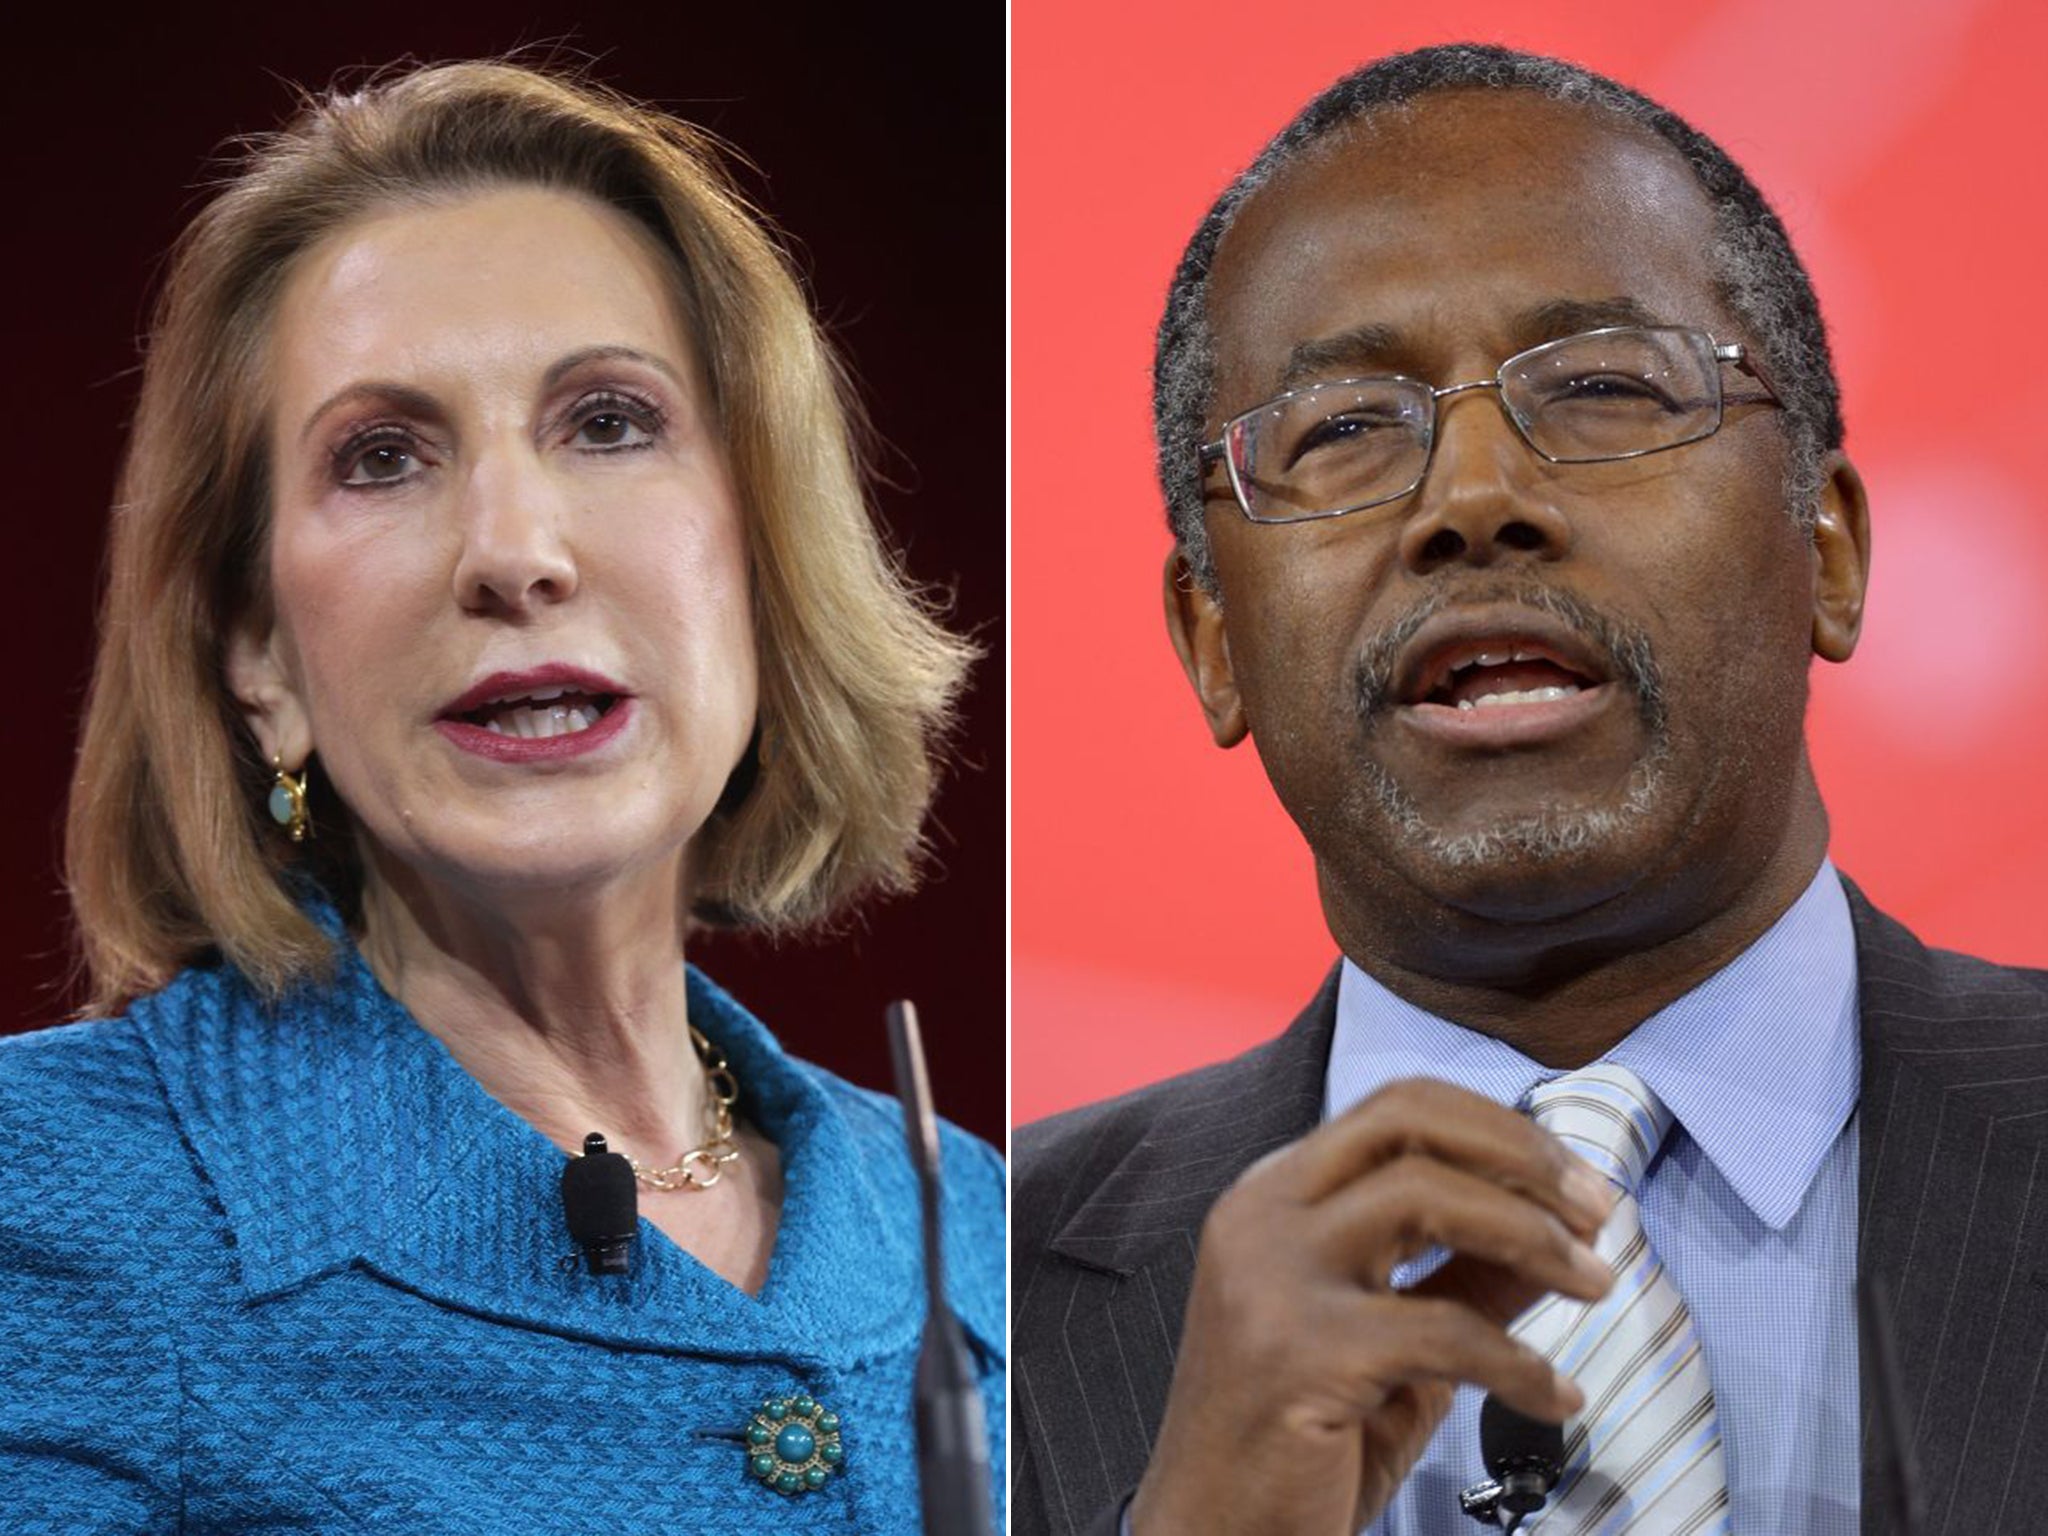 Carly Fiorina is a former CEO of Hewlett-Packard, while Ben Carson is a retired pediatric neurosurgeon